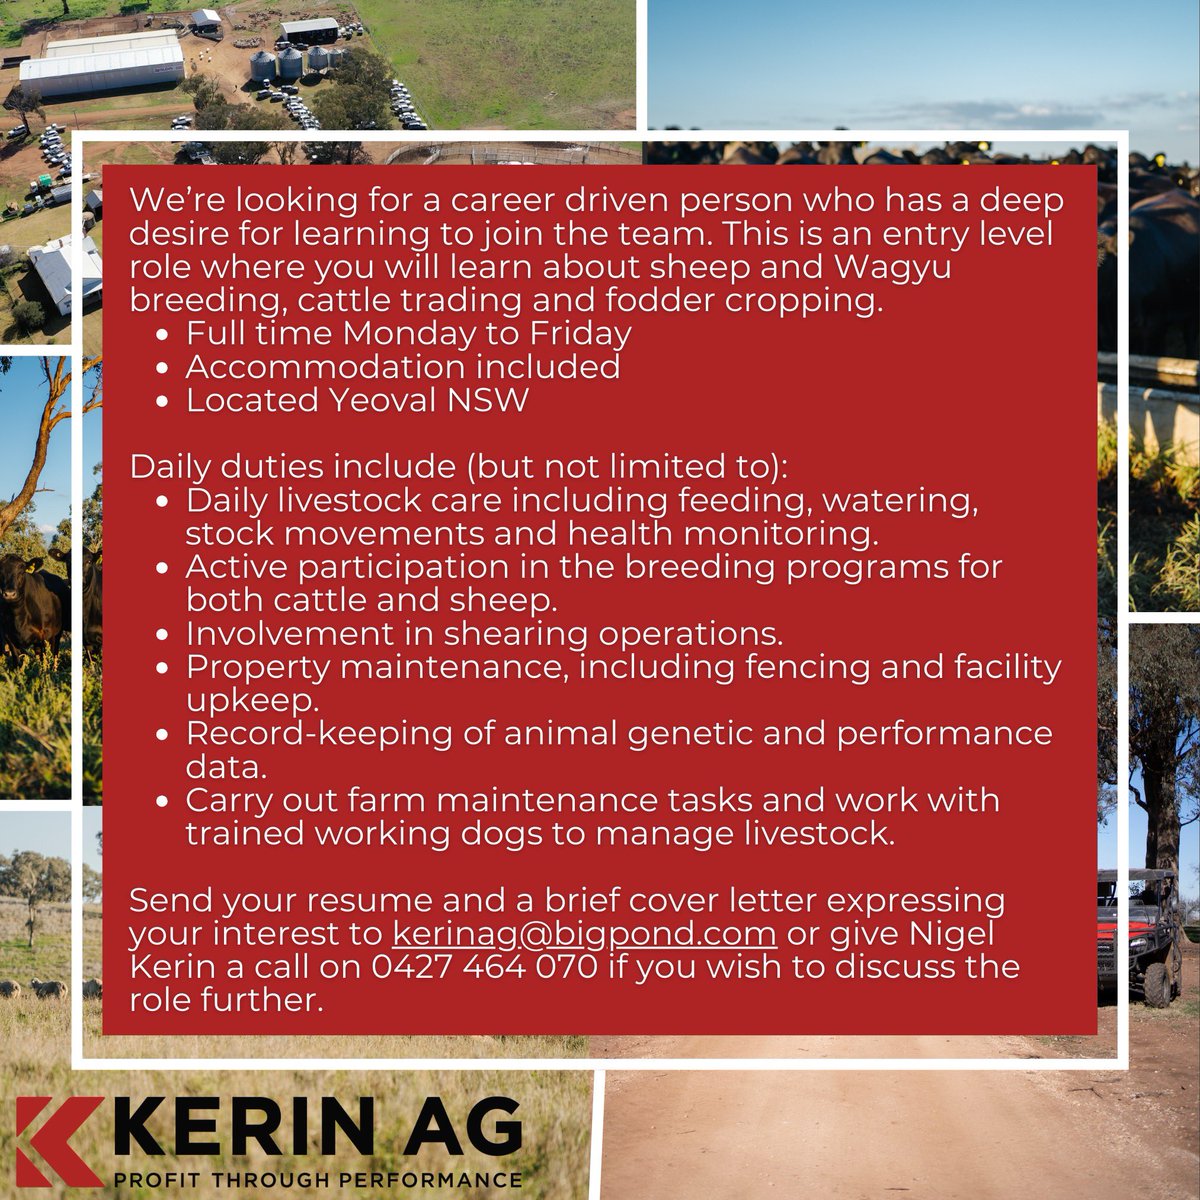 We’re hiring!
Send your resume and a brief cover letter expressing your interest to kerinag@bigpond.com or give Nigel Kerin a call on 0427 464 070 if you wish to discuss the role further. 

#AgricultureJobs #FarmWork #AgriCareers #FarmingJobs #AgJobs #JuniorFarmHand…